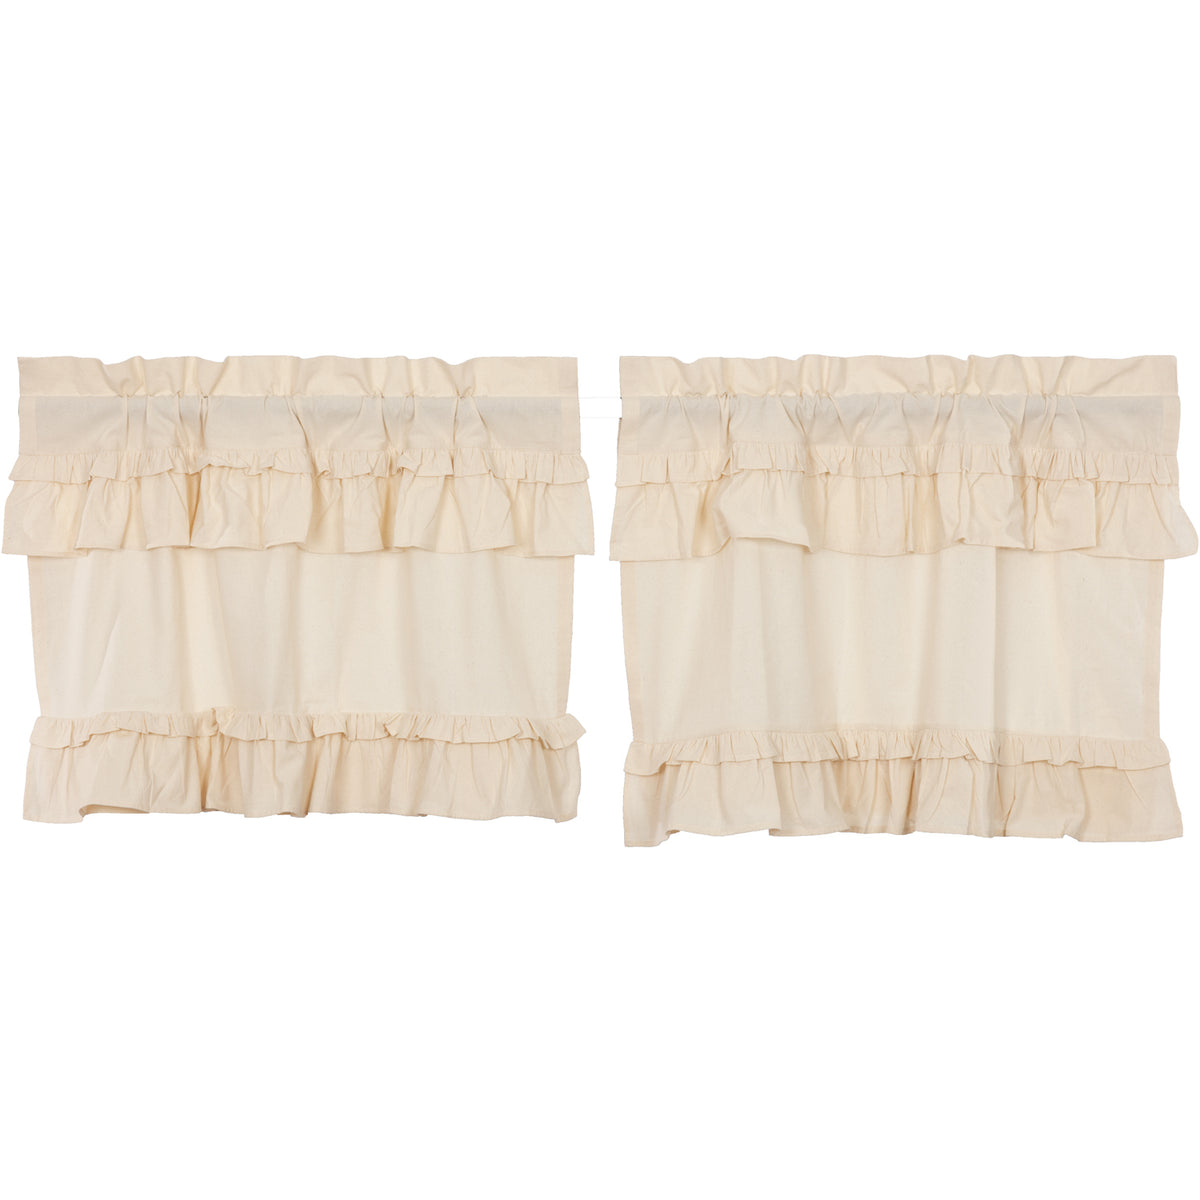 Muslin Ruffled Unbleached Natural Tier Set of 2 L24xW36